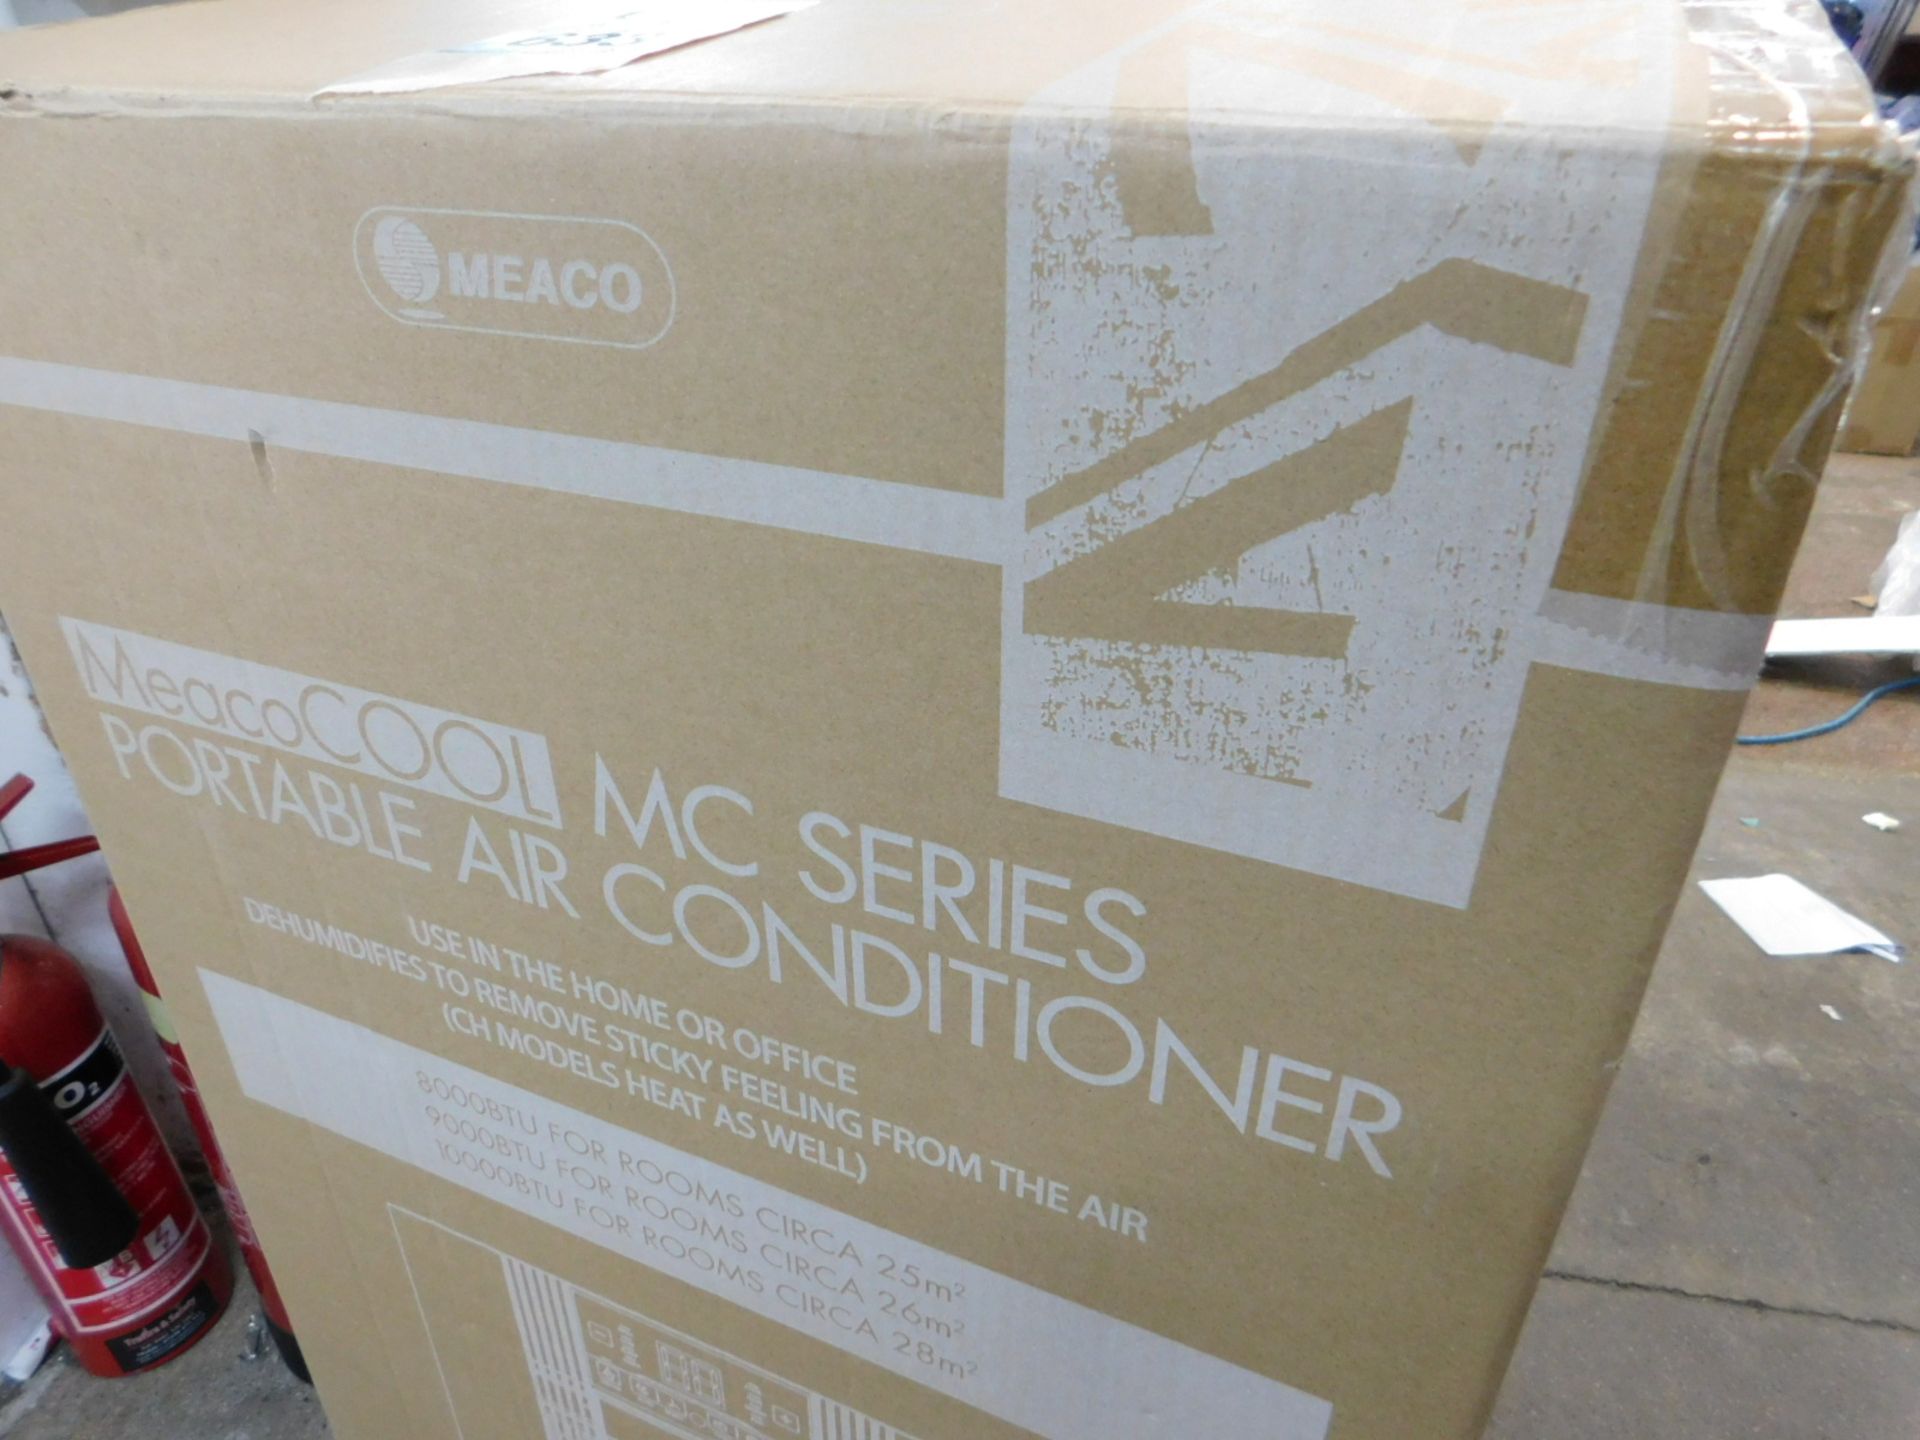 1 BOXED MEACO MC SERIES 10,000BTU PORTABLE AIR CONDITIONER RRP £349.99 (WORKING, IN VERY GOOD